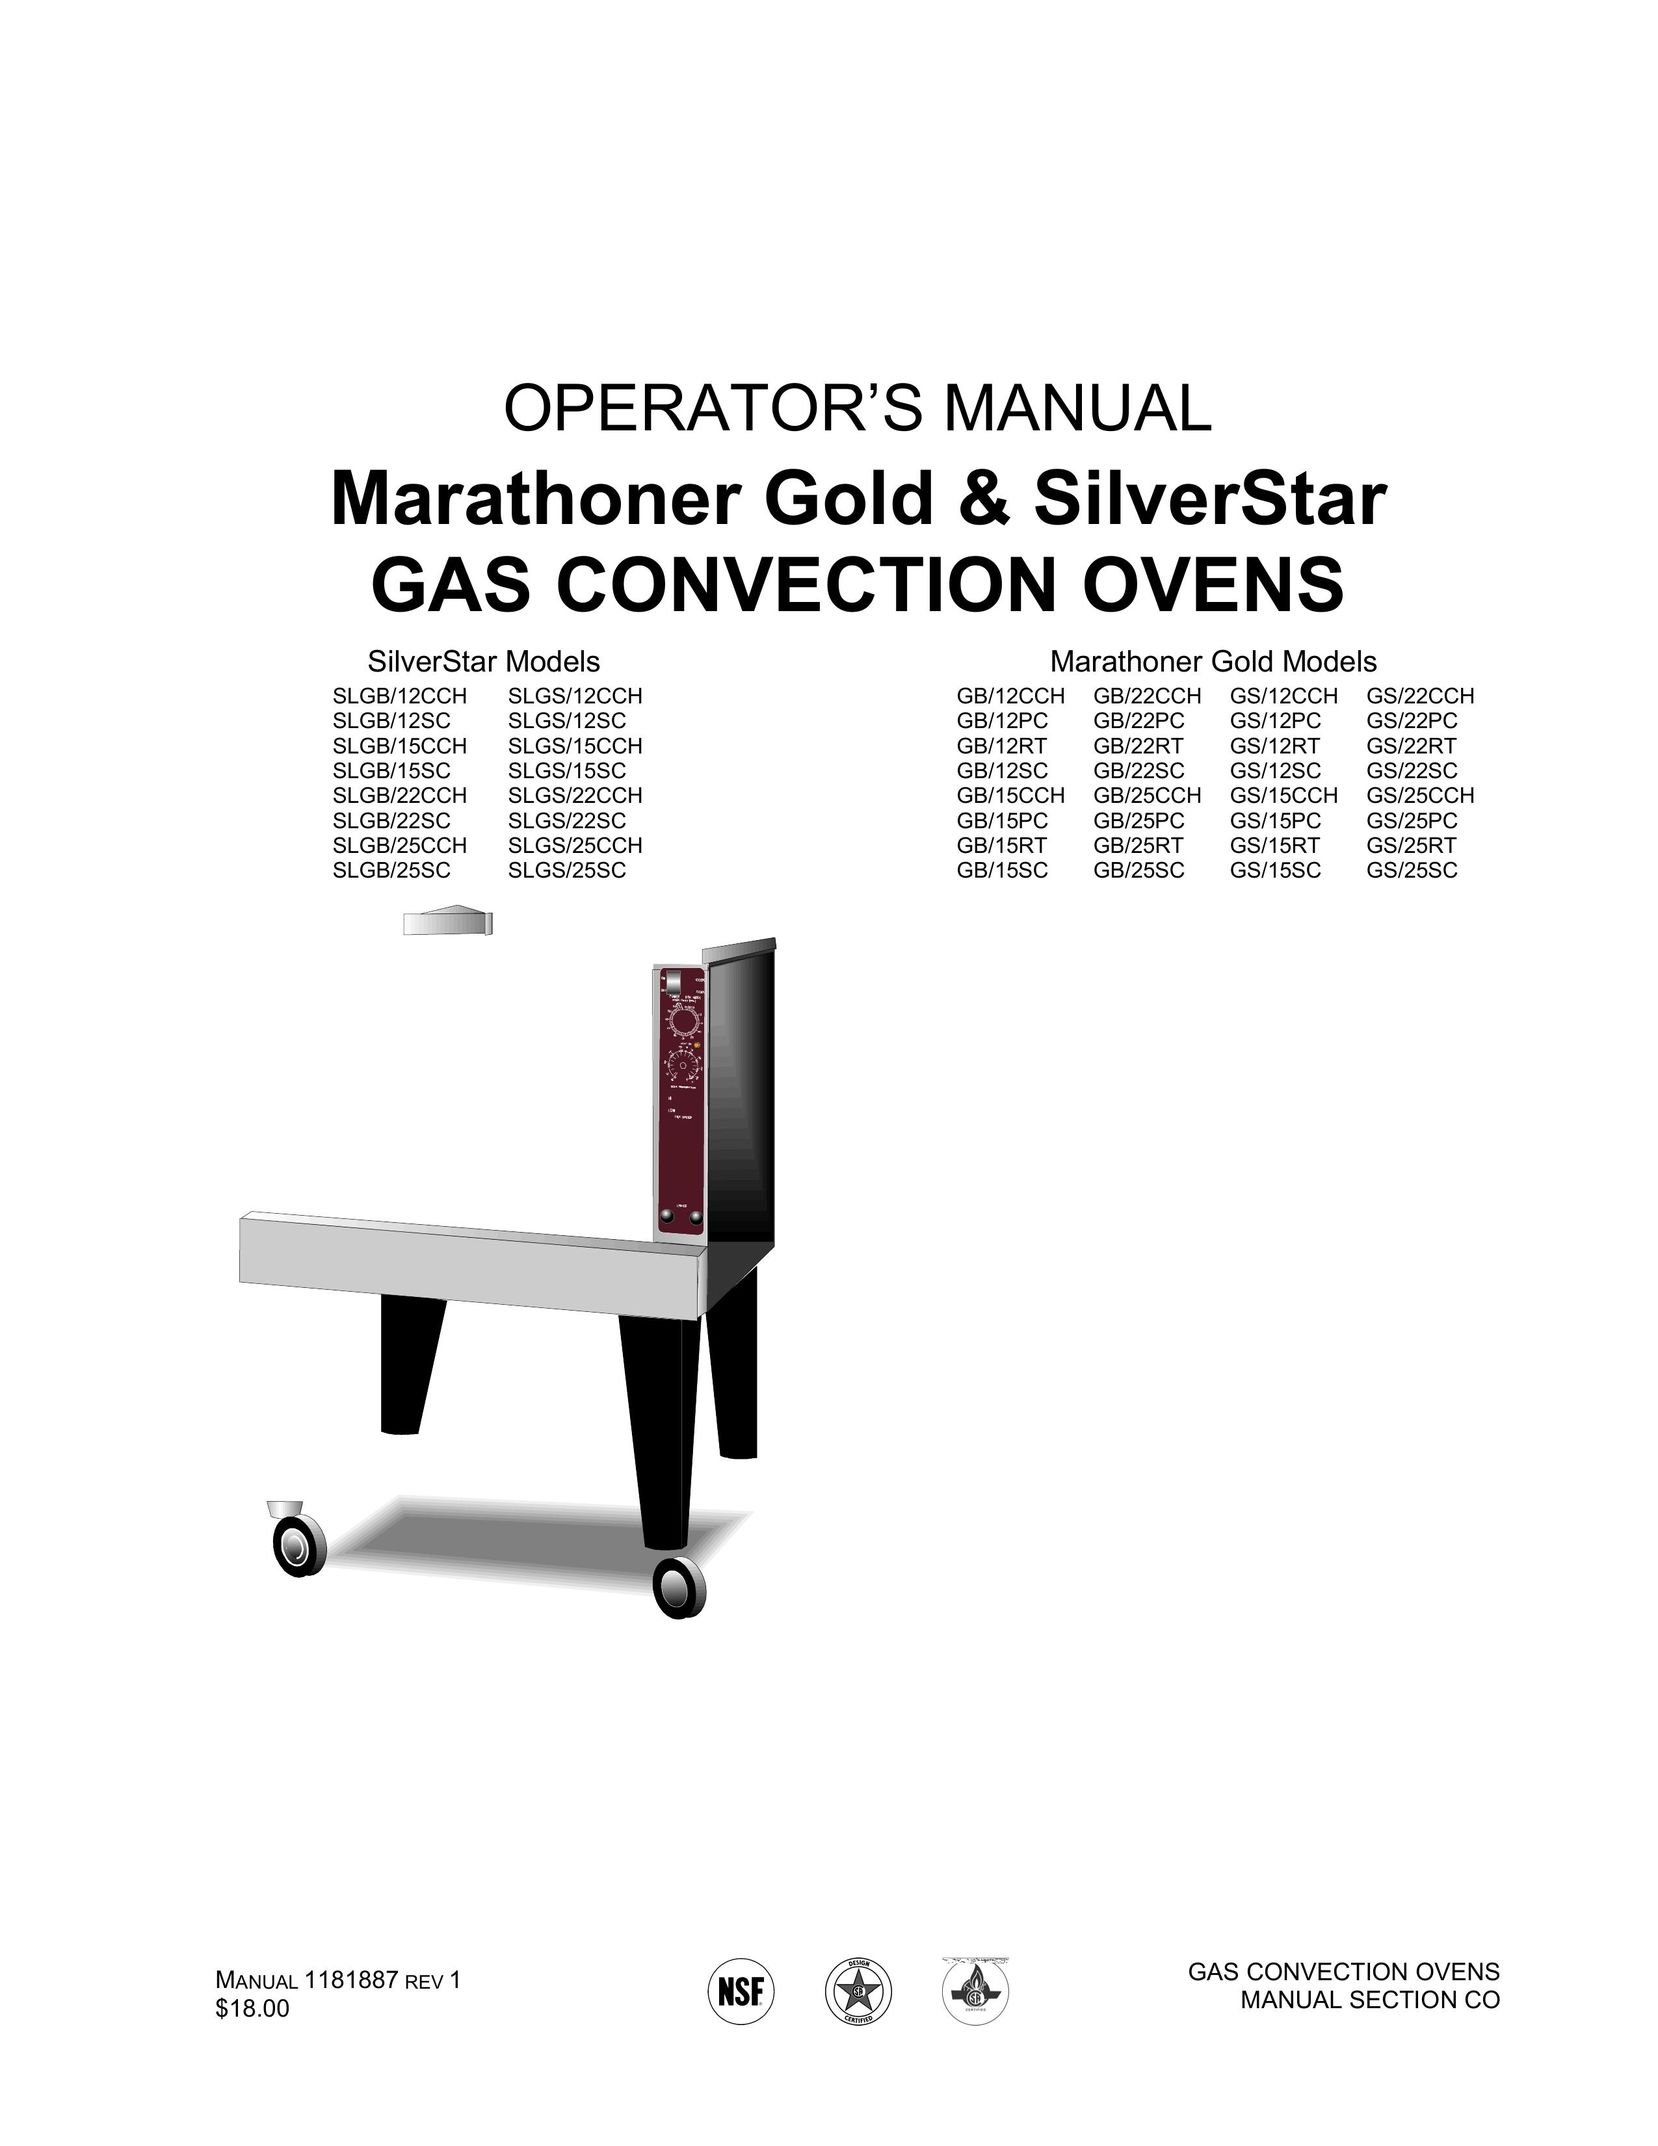 Southbend GB/12PC Oven User Manual